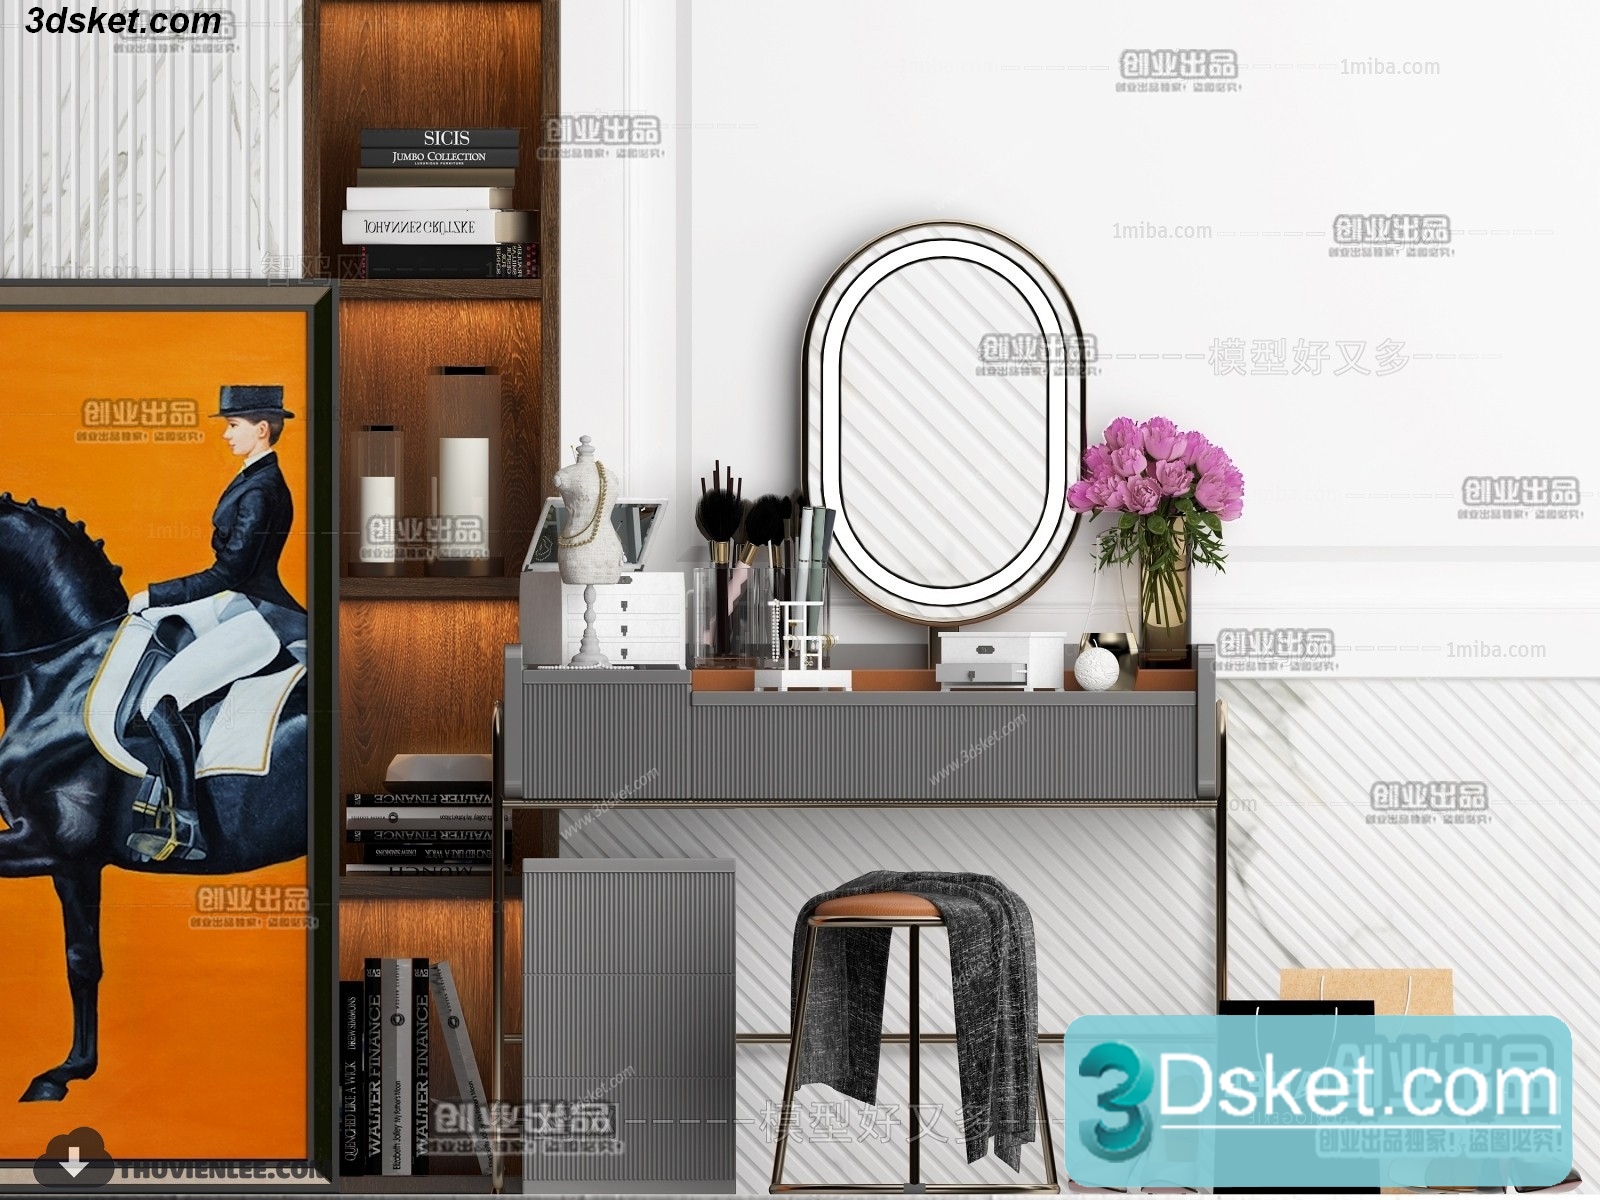 3D Model Dressing Table Free Download 050